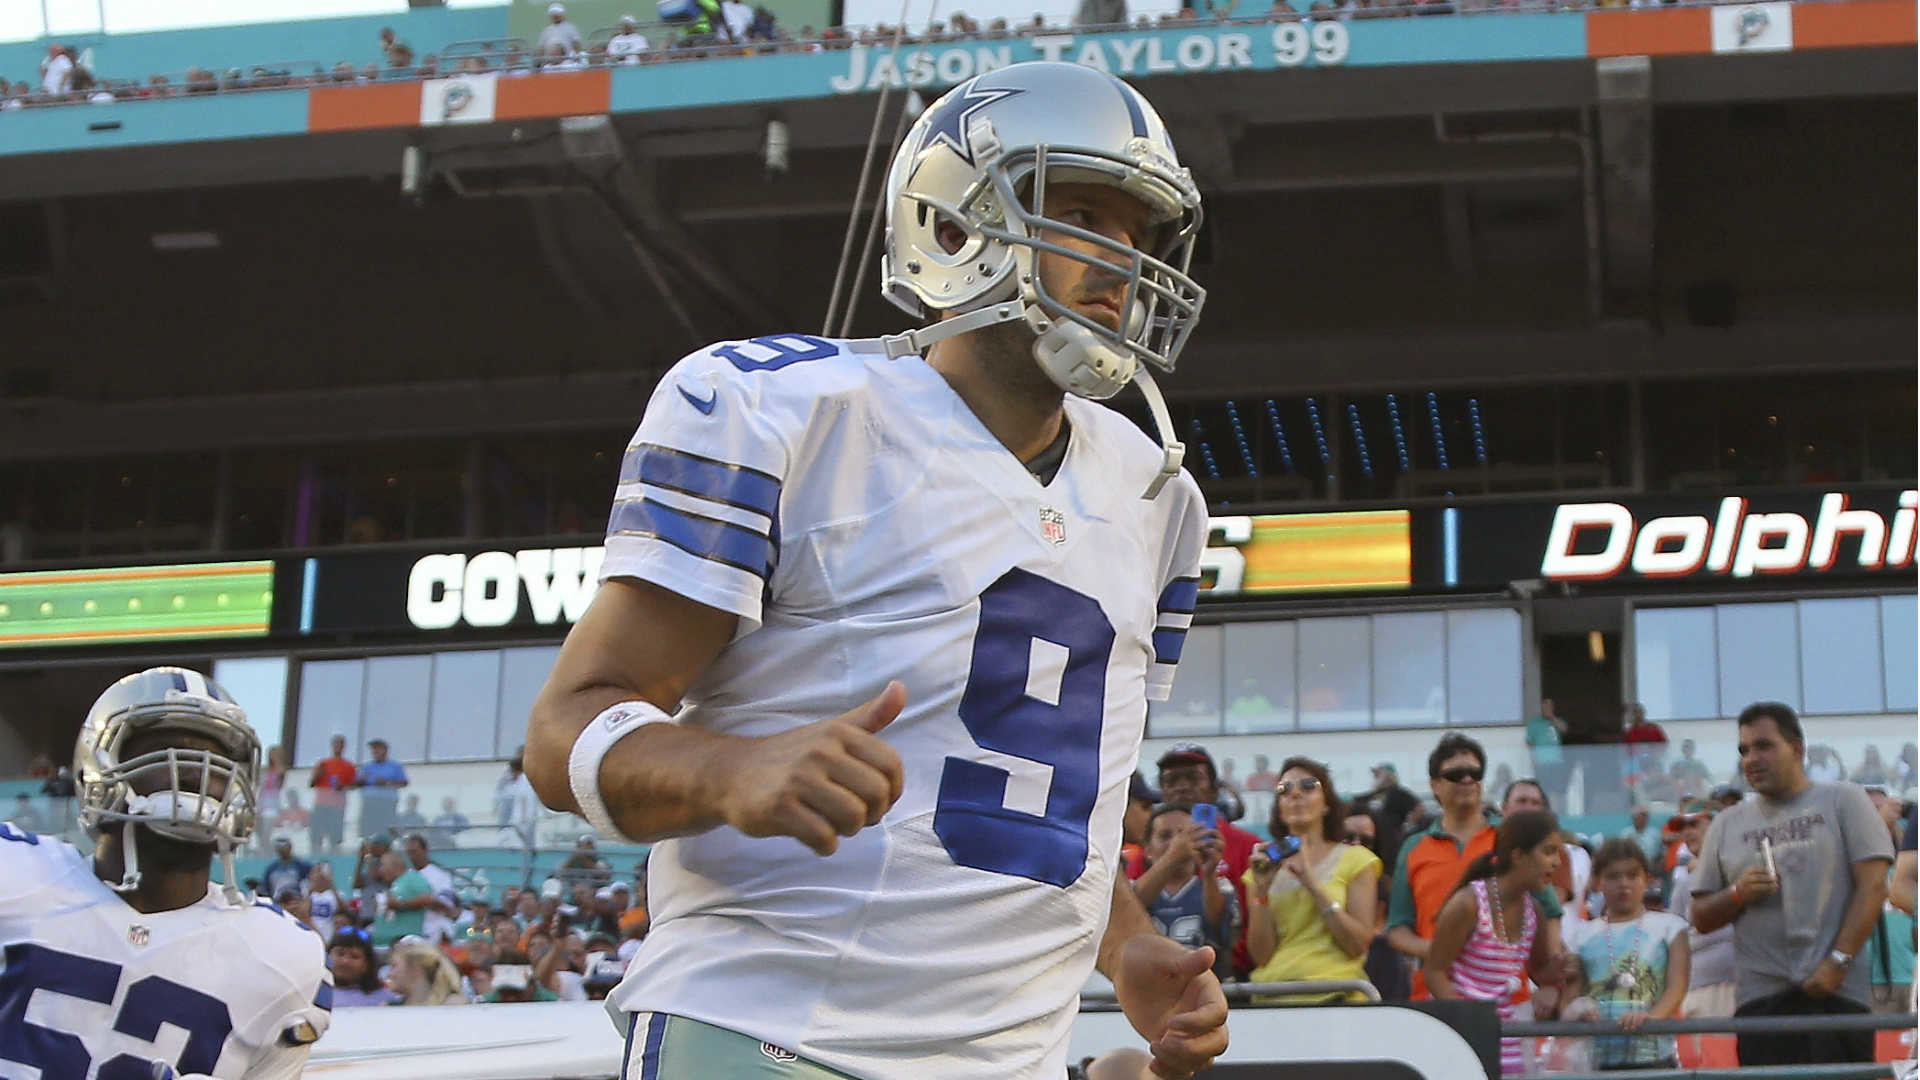 1920x1080 Tony Romo belongs in Pro Football Hall of Fame for Cowboys career